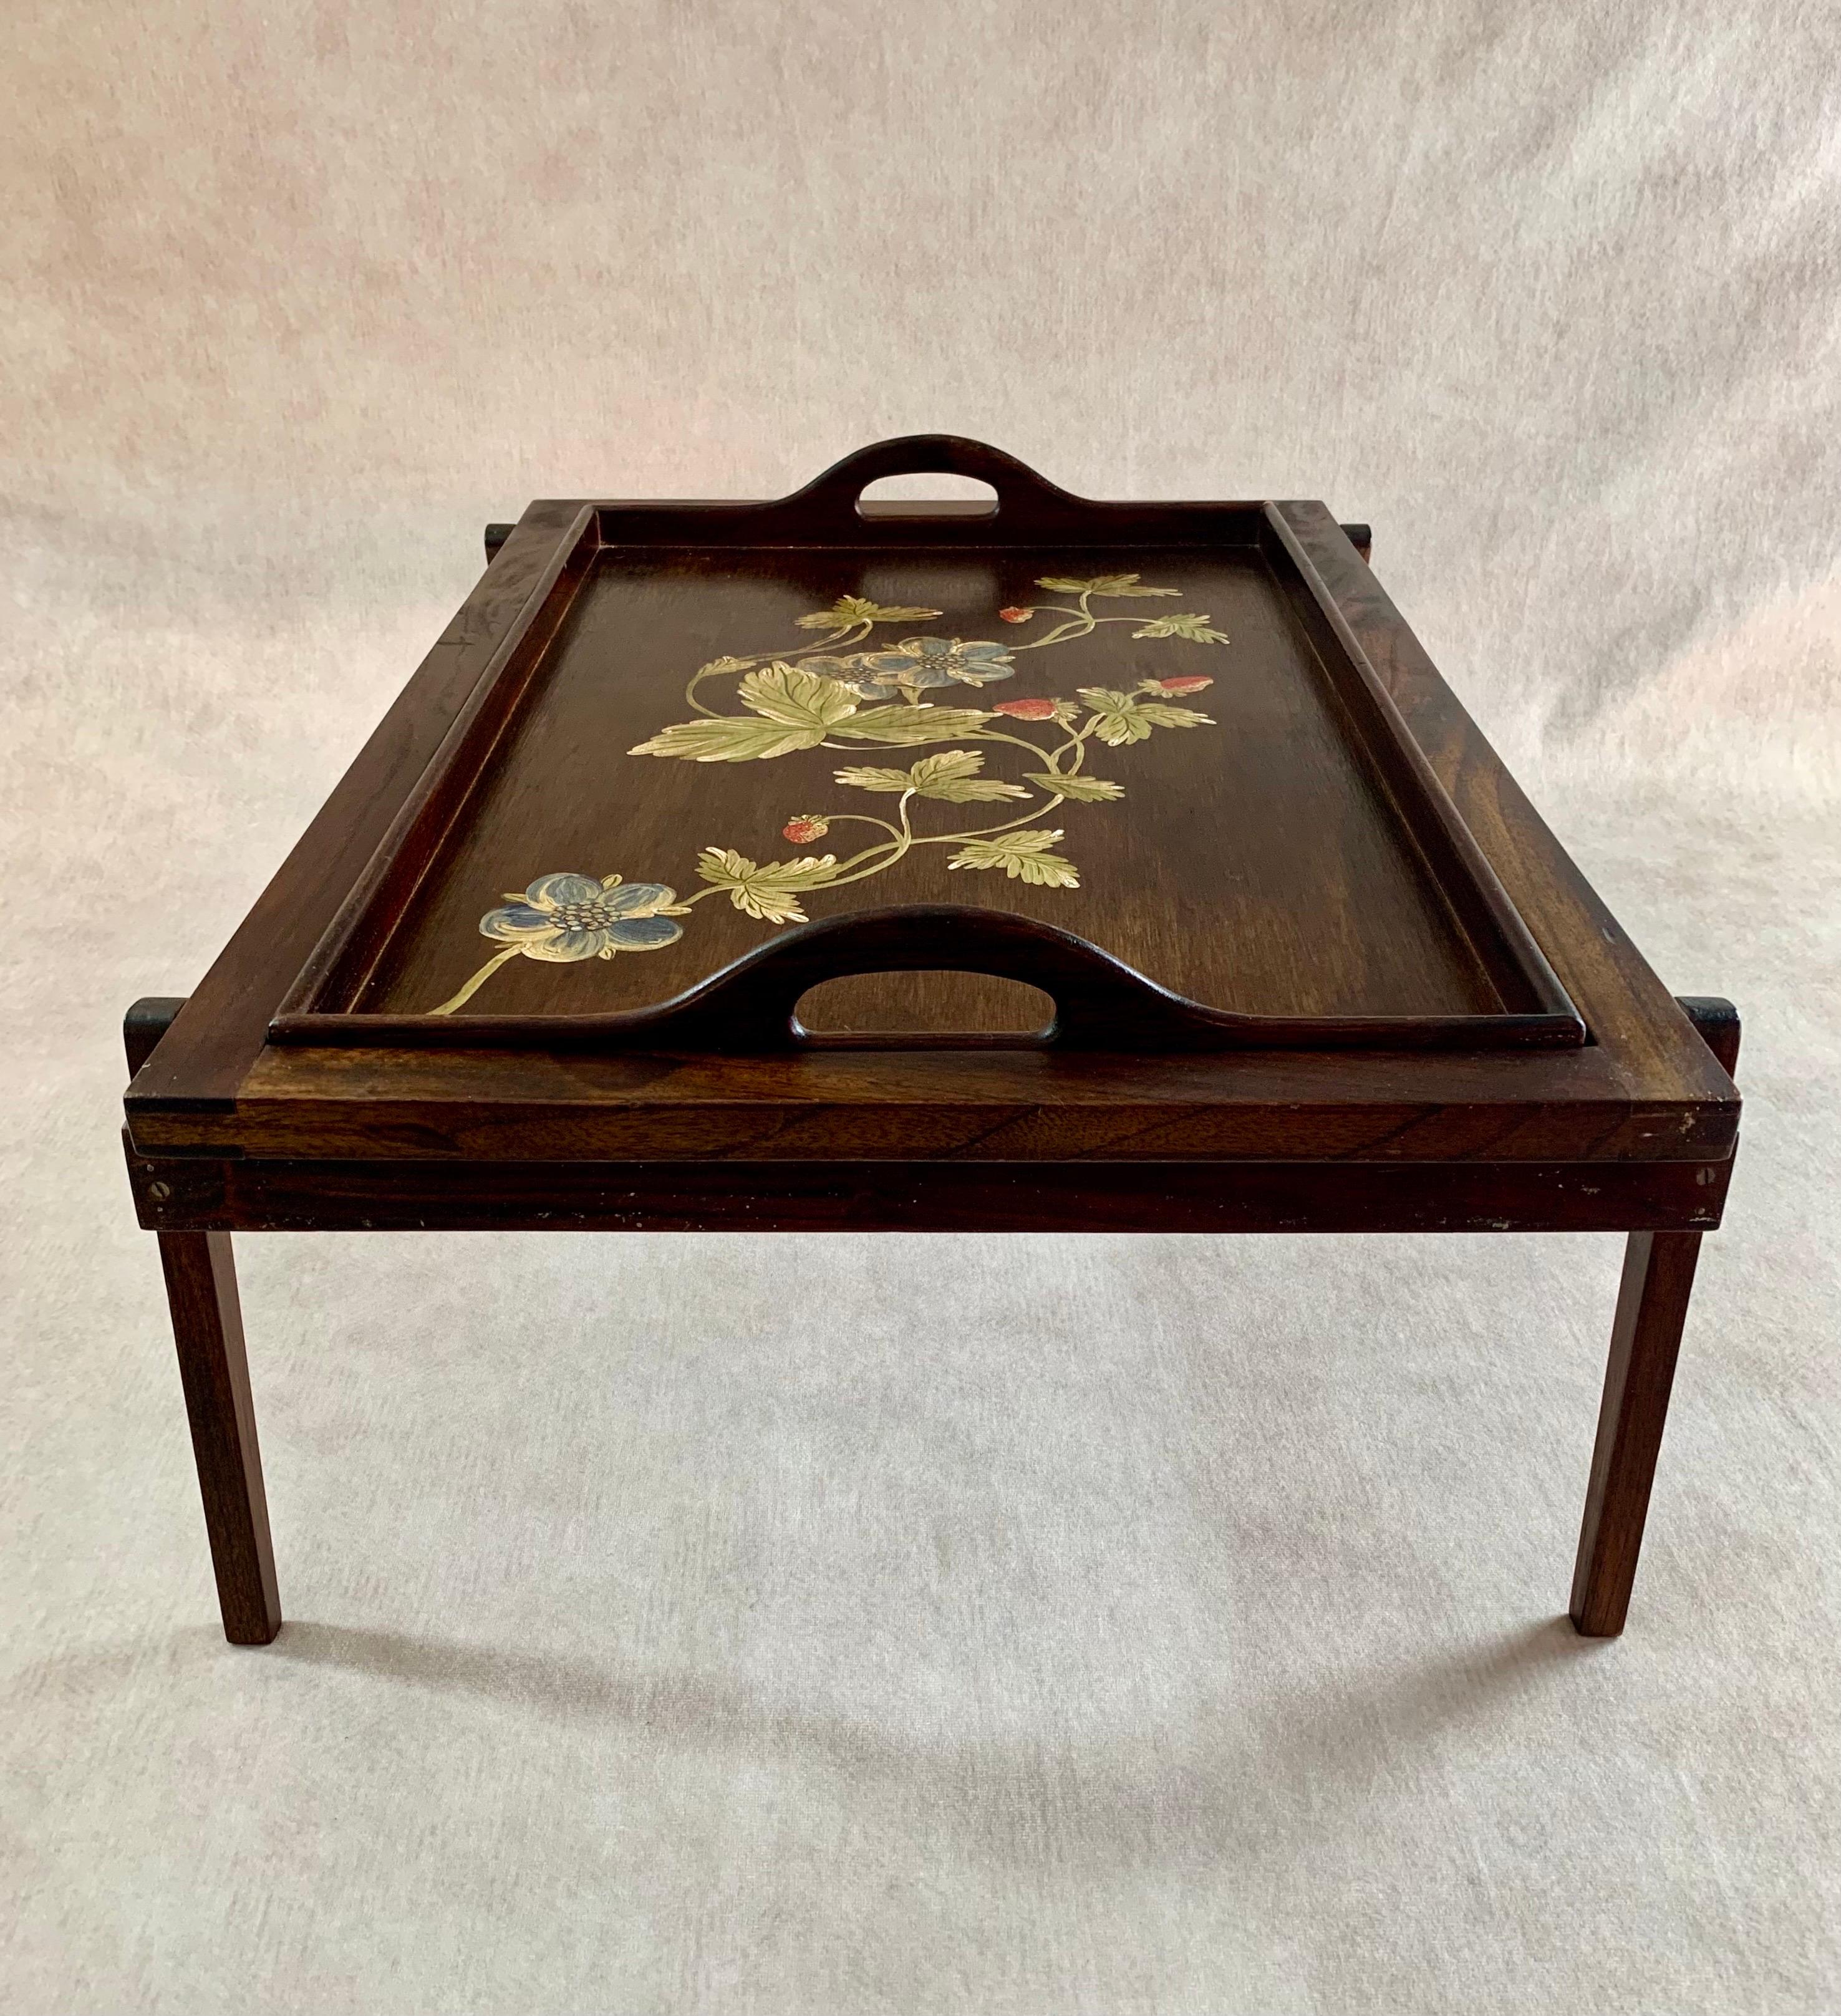 Vintage Hand Painted Breakfast-In-Bed Tray w/ Stand In Good Condition For Sale In Middletown, MD